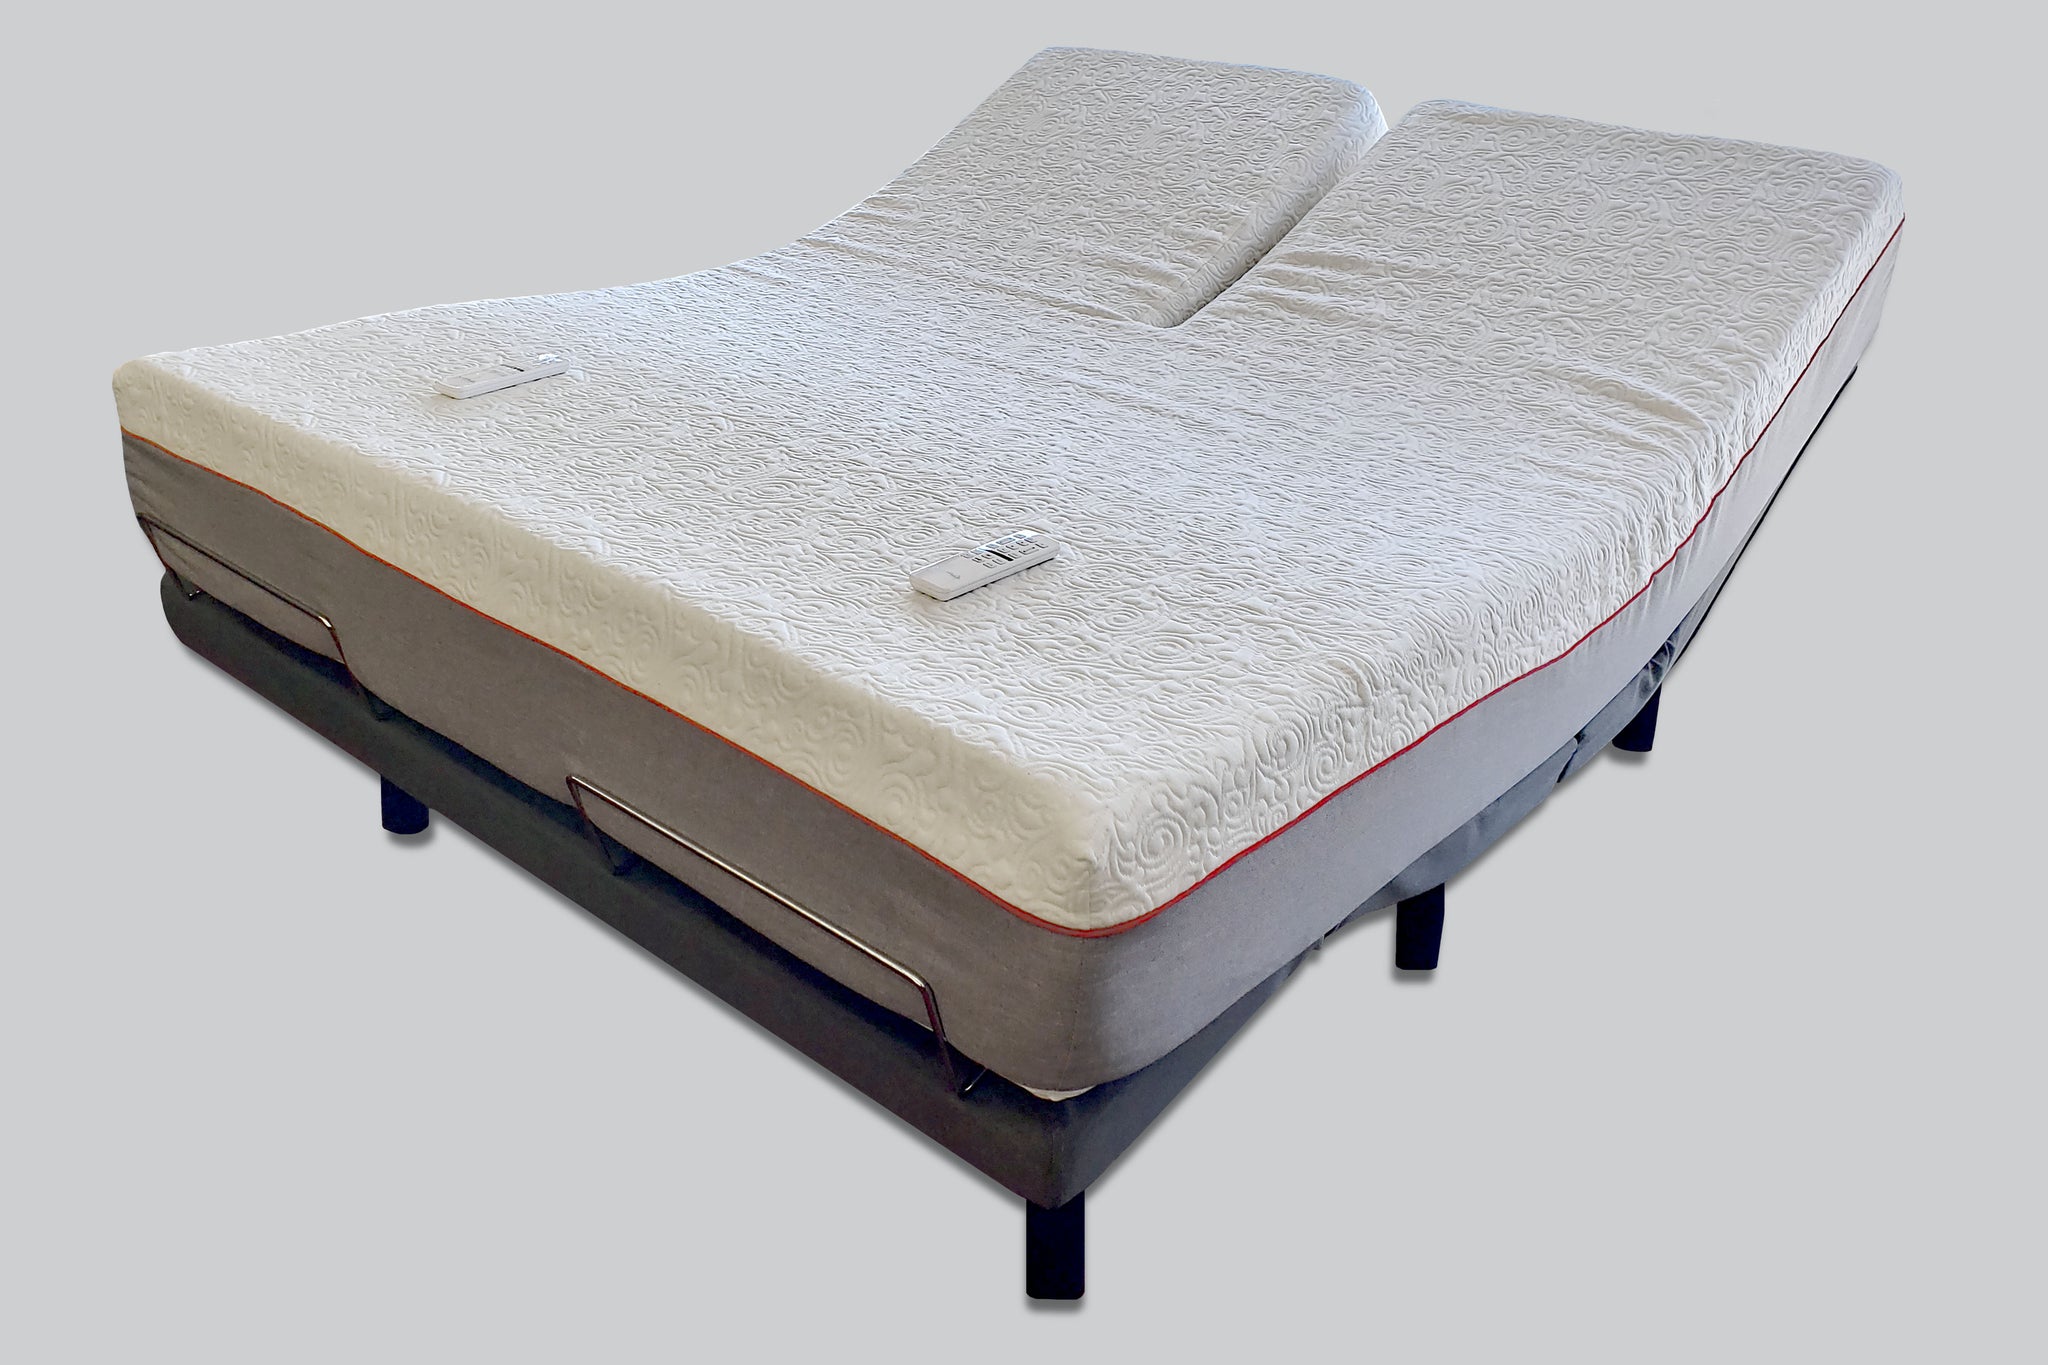 10" Chill with Variance Split Top Adjustable – Xtreme Discount Mattress